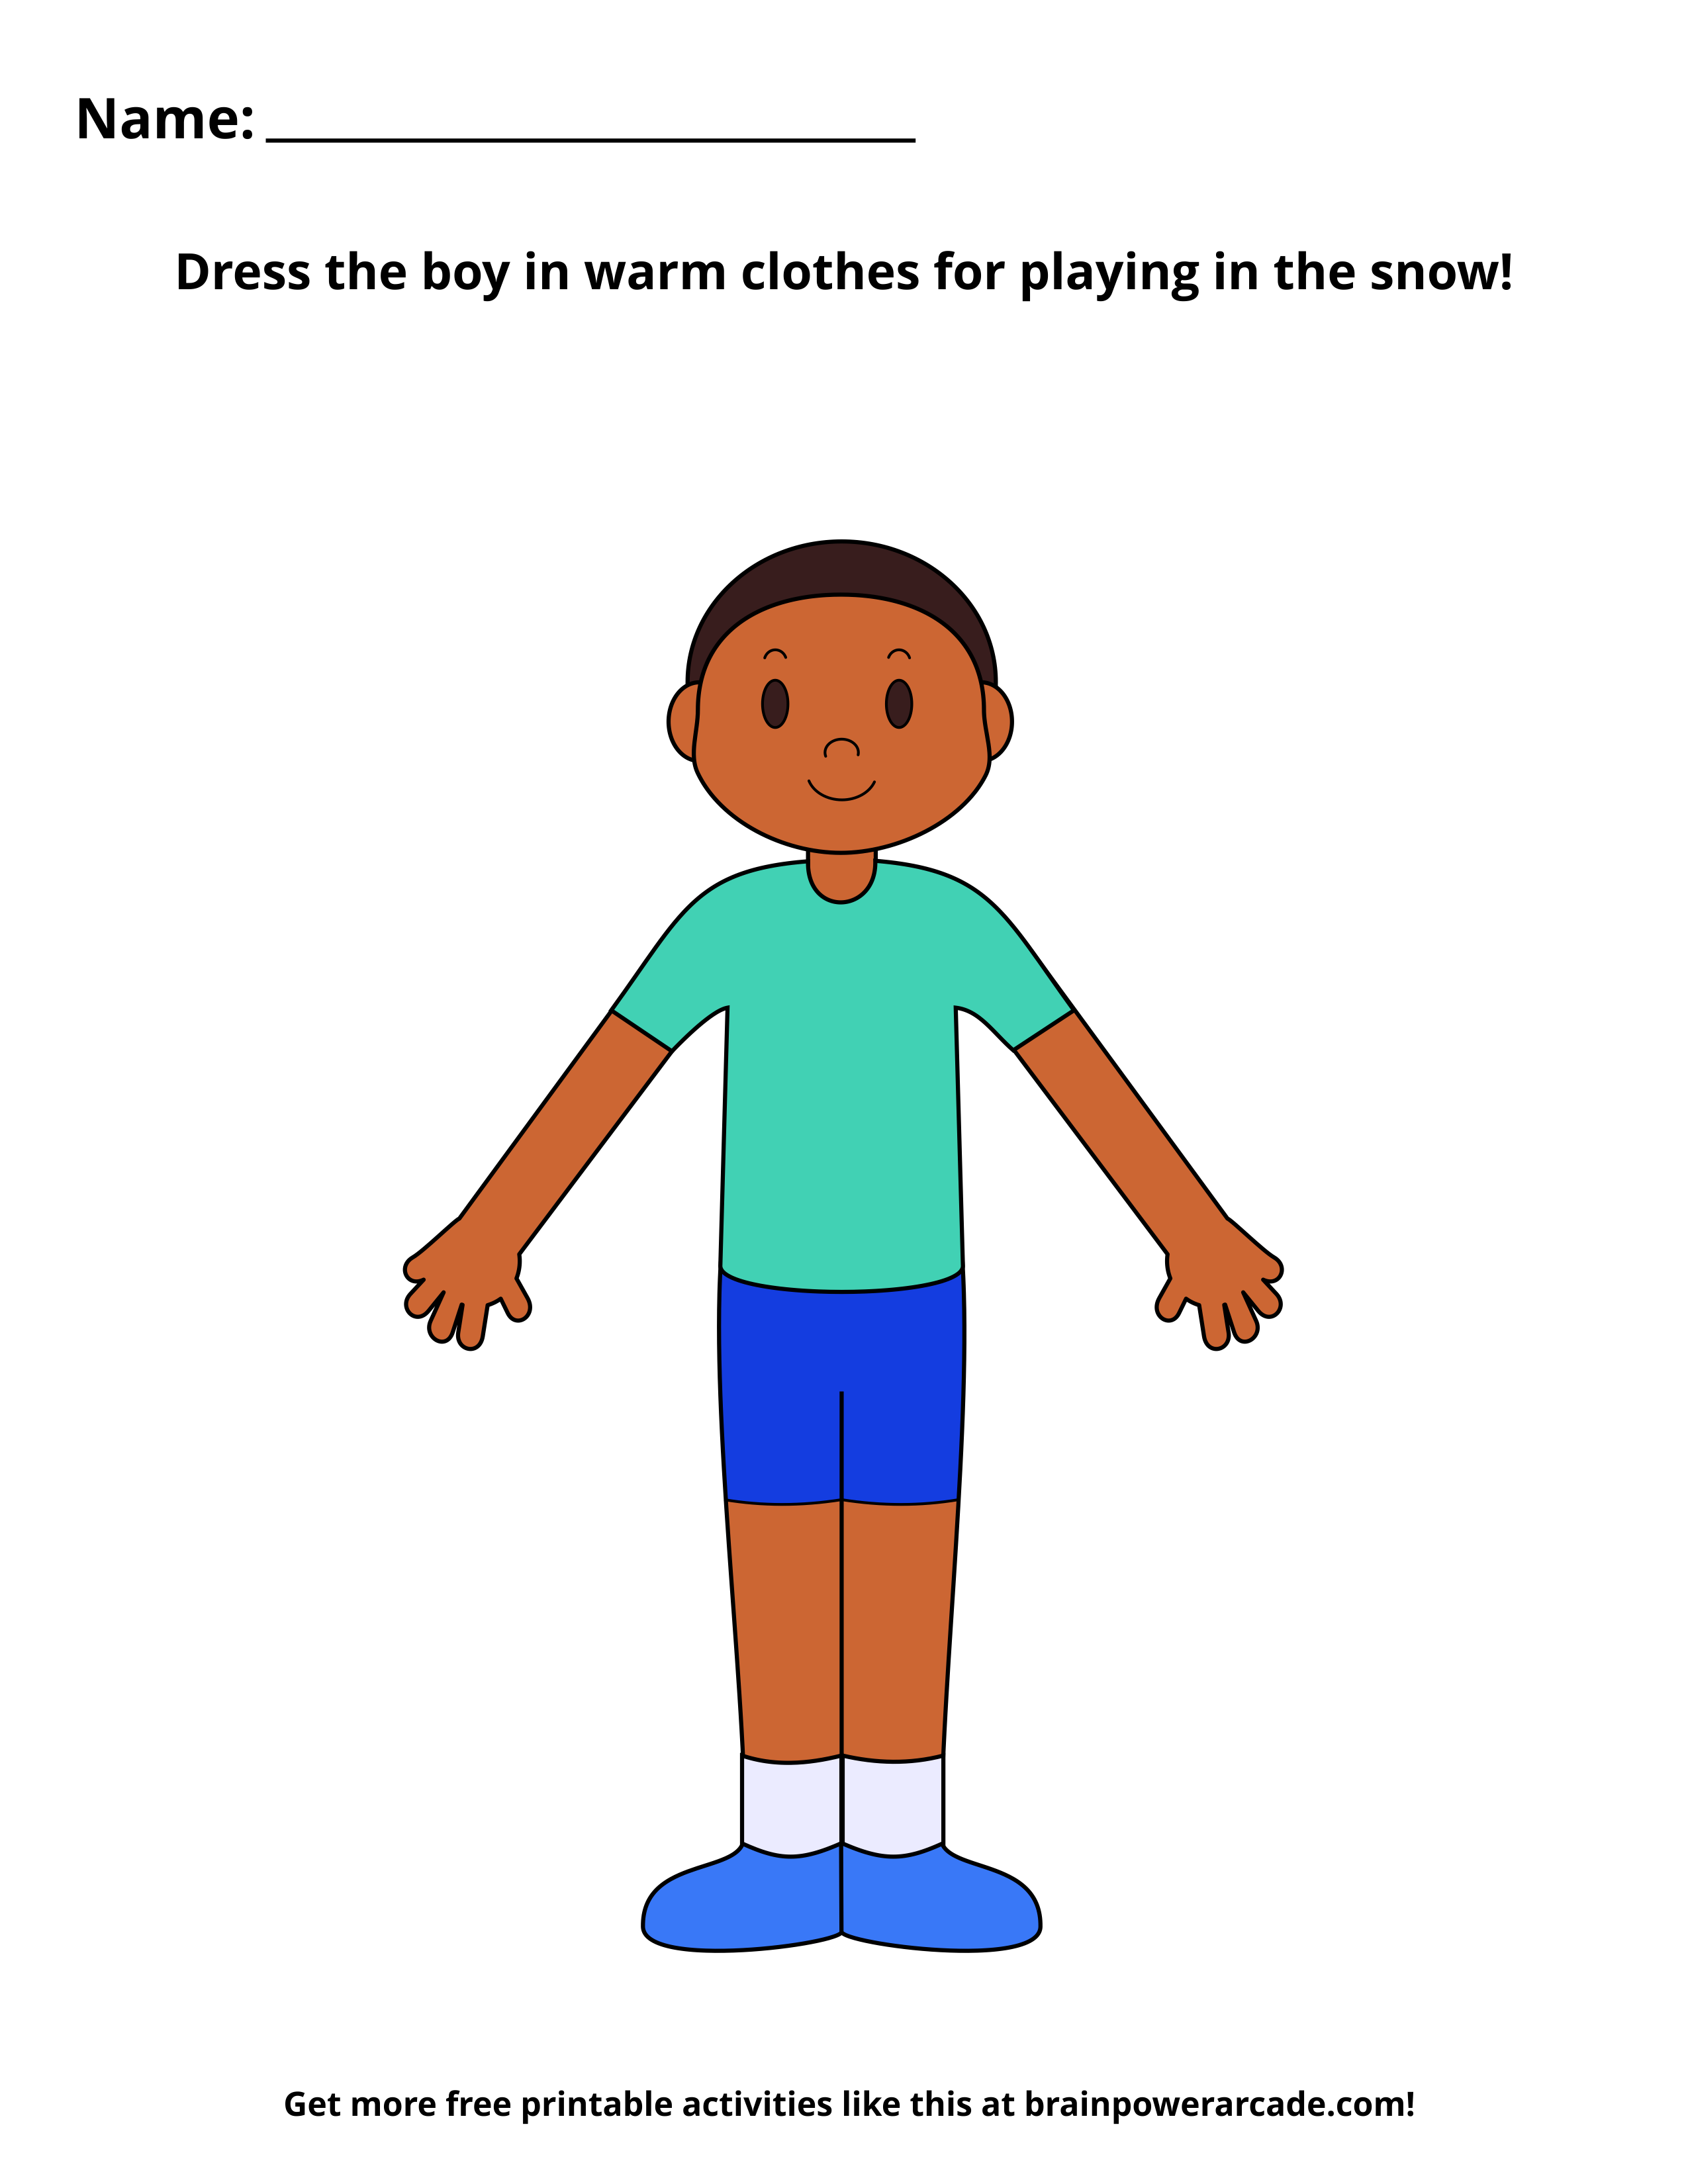 Dress the Boy in Clothes for Snowy Weather (Page 1)